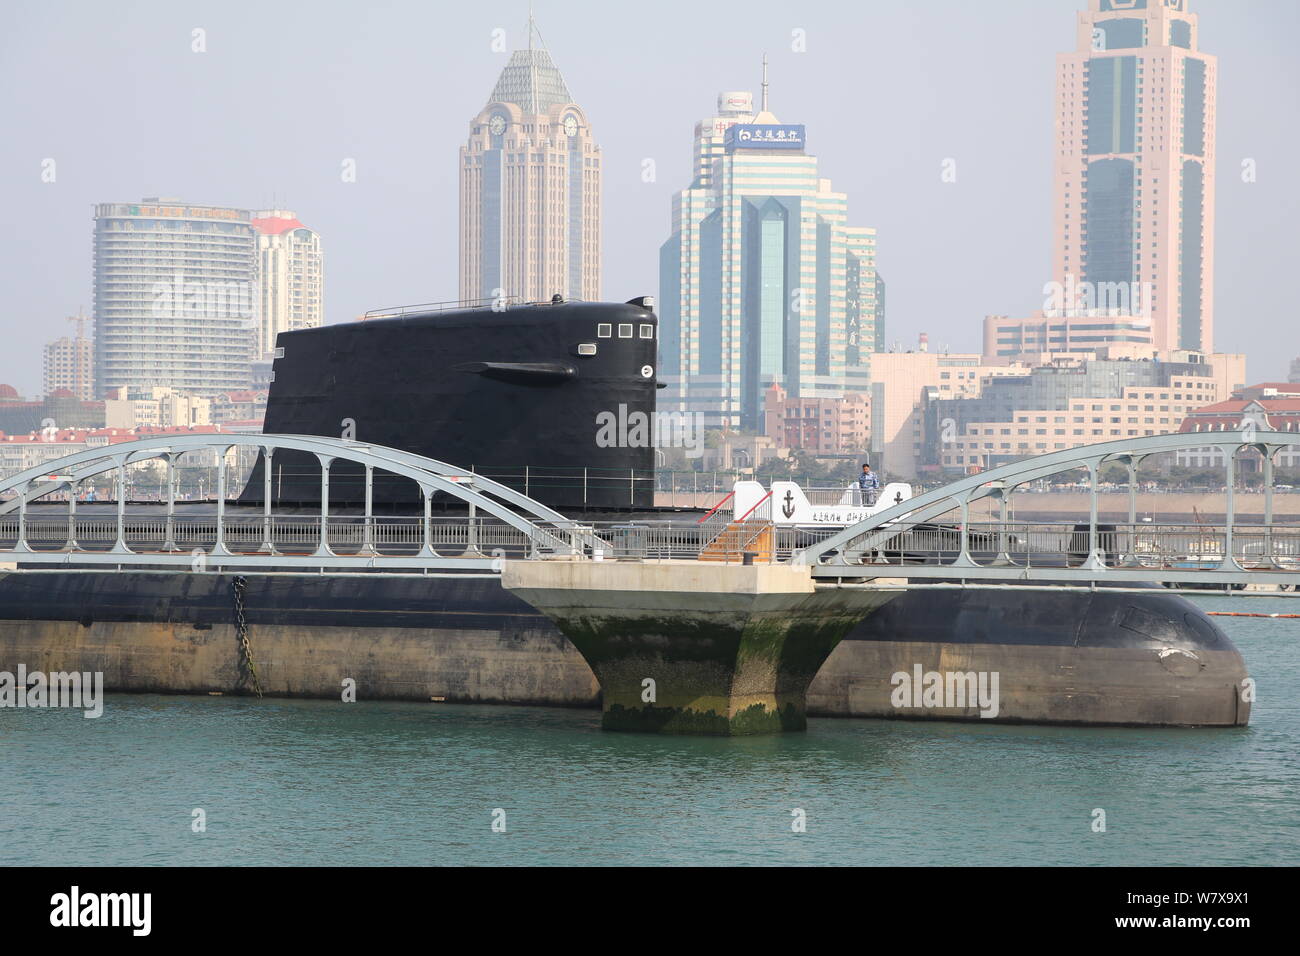 A decommissioned Type-091 nuclear submarine is on display at the Chinese Navy Museum in Qingdao city, east China's Shandong province, 24 April 2017. Stock Photo